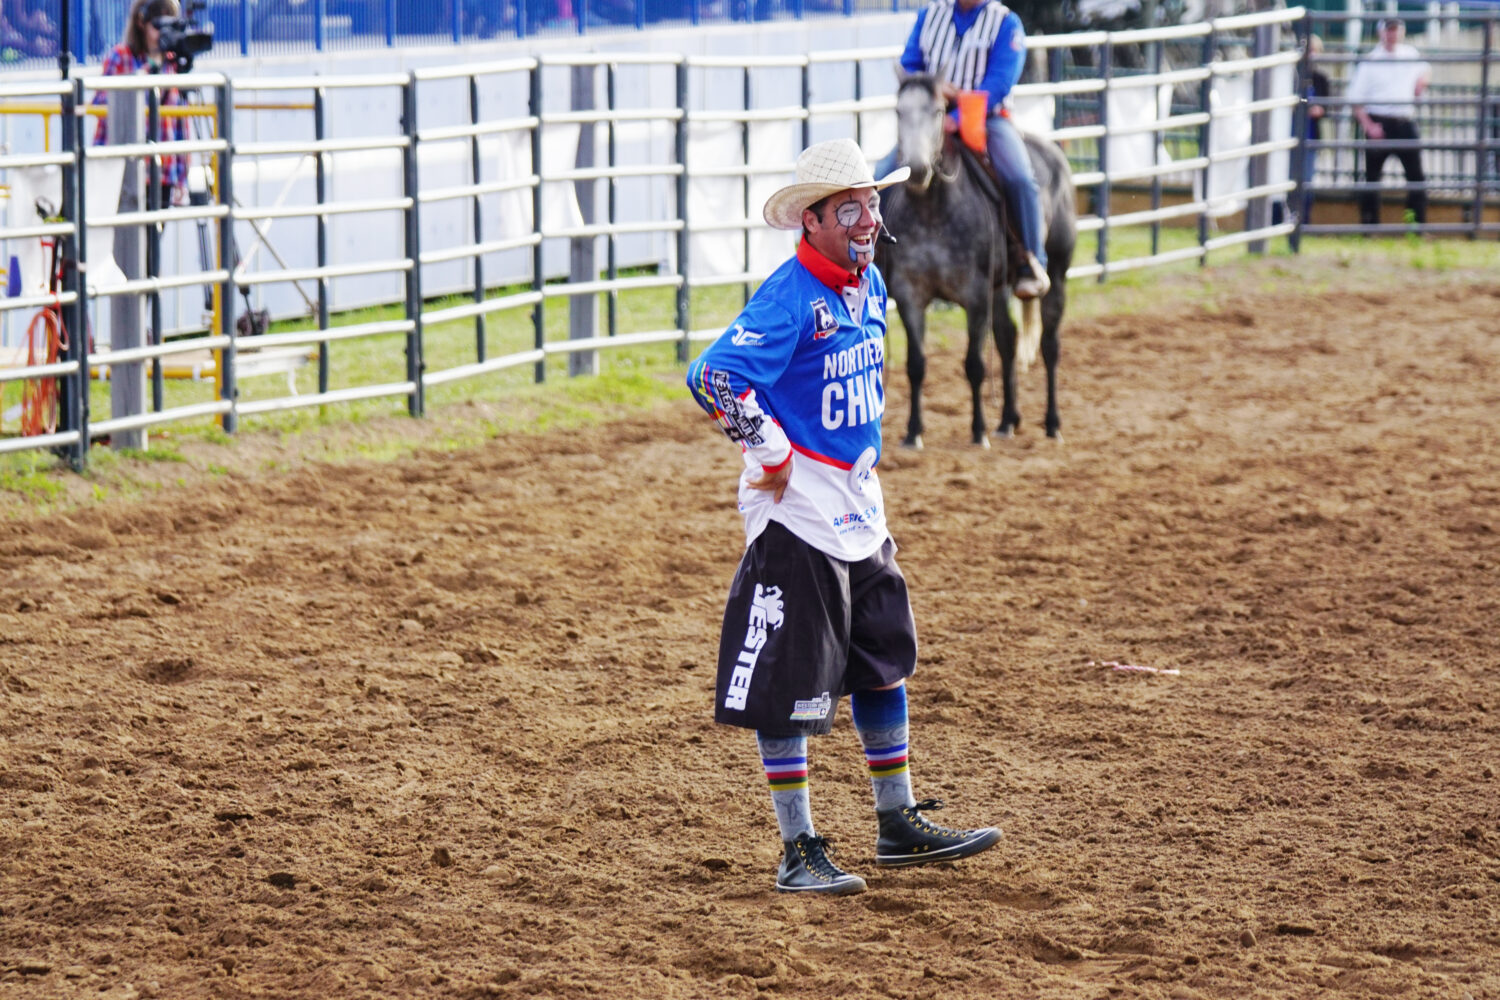 Clowning for the Rodeo: It’s more than just putting on a happy face